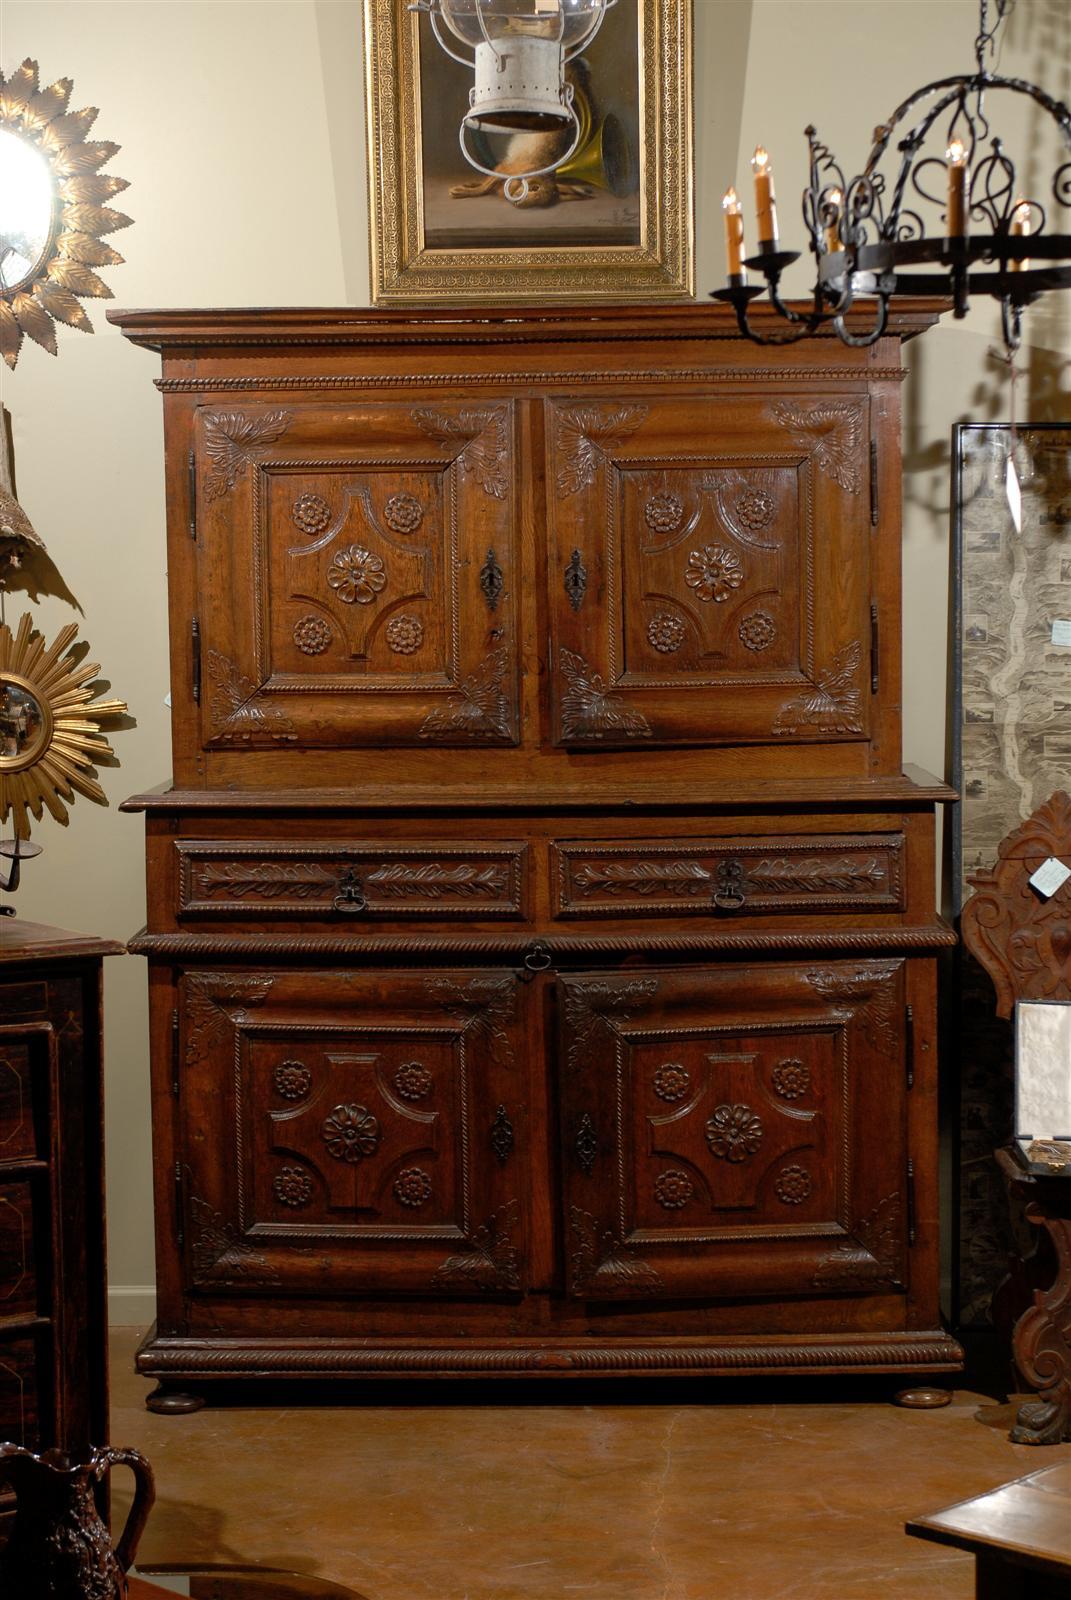 Early 17th century French walnut buffet a deux corps, the corniced top surmounting two doors, opening to reveal two shelves on the left and one on the right, above two drawers and a slide out writing surface, all above a double door cabinet opening